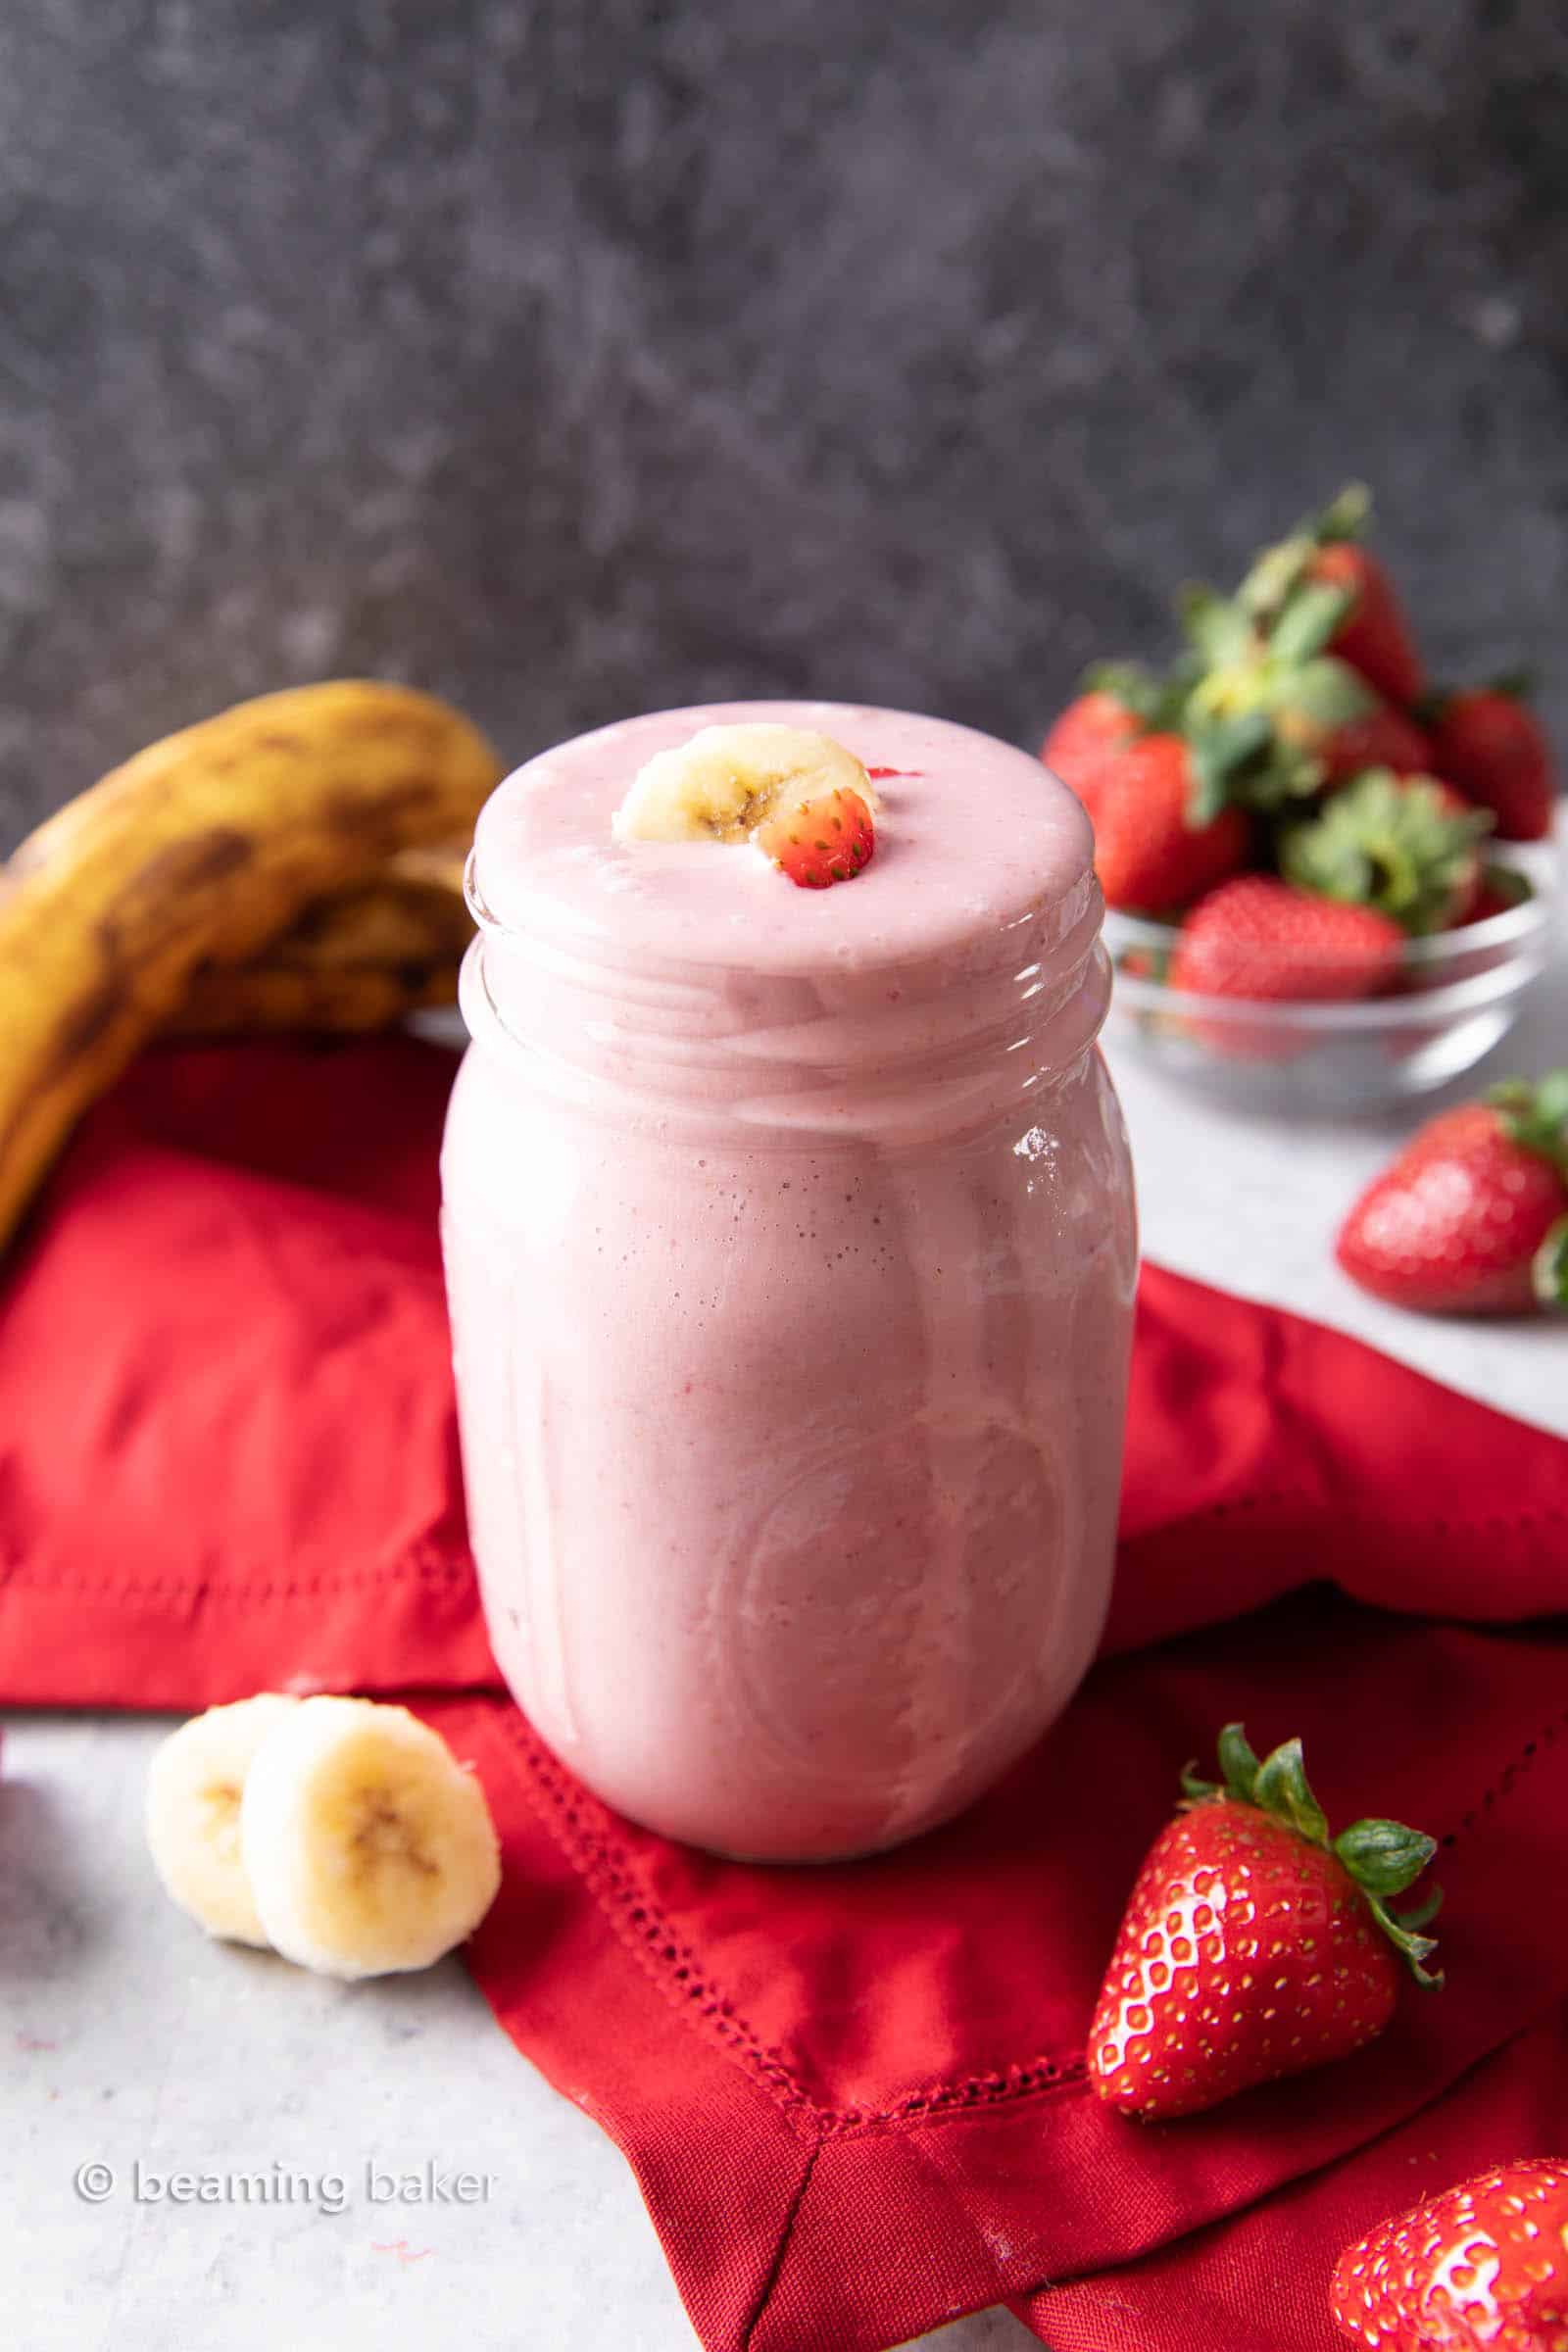 Strawberry Banana Smoothie Recipe: learn how to make a strawberry banana smoothie with 3 ingredients! Smooth, creamy and refreshing! Healthy, Easy to Make, Simple Ingredients. #Strawberry #Smoothie #Banana #Recipe | Recipe at BeamingBaker.com